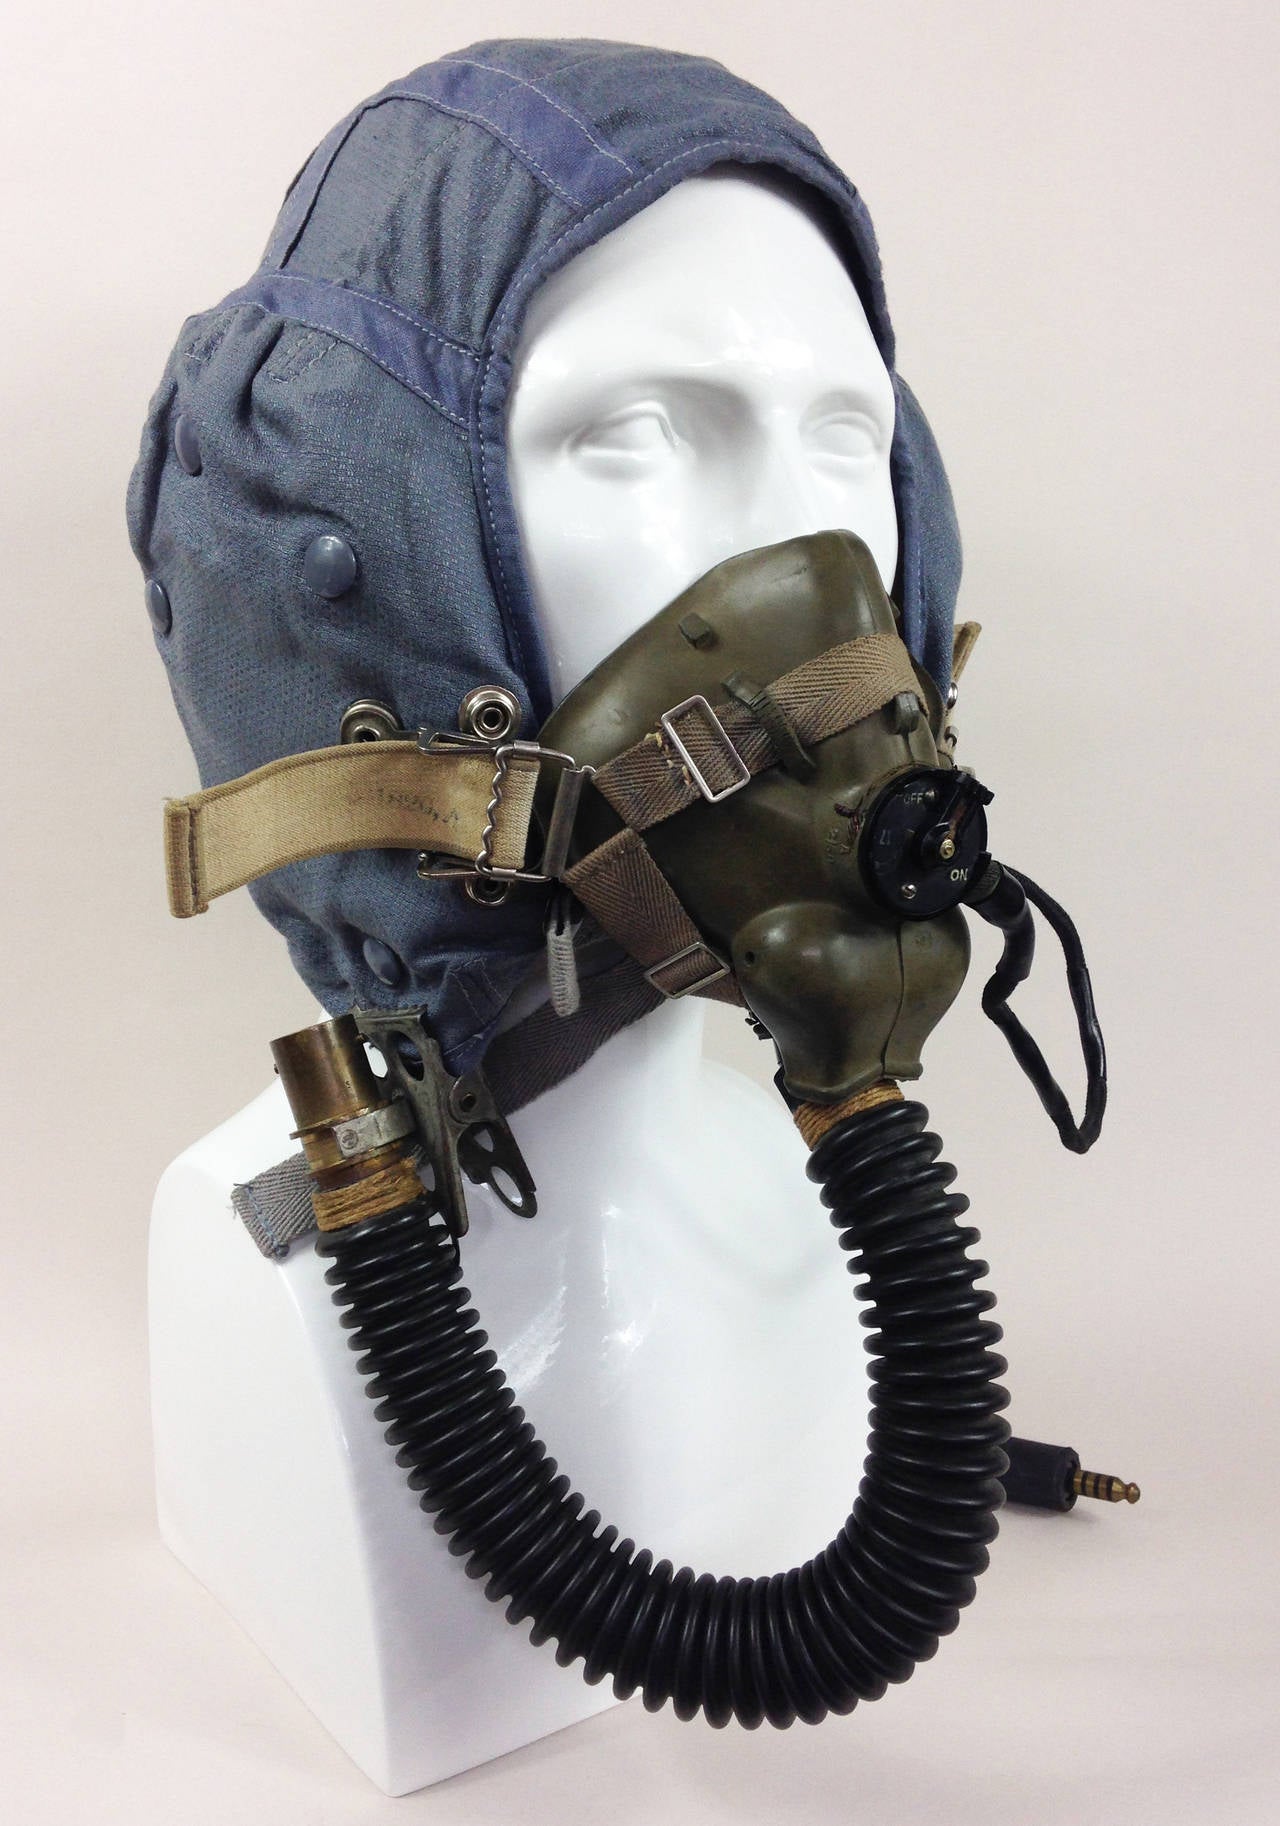 20th Century Early Jet Age Pilot's Head Set of the Royal Air Force